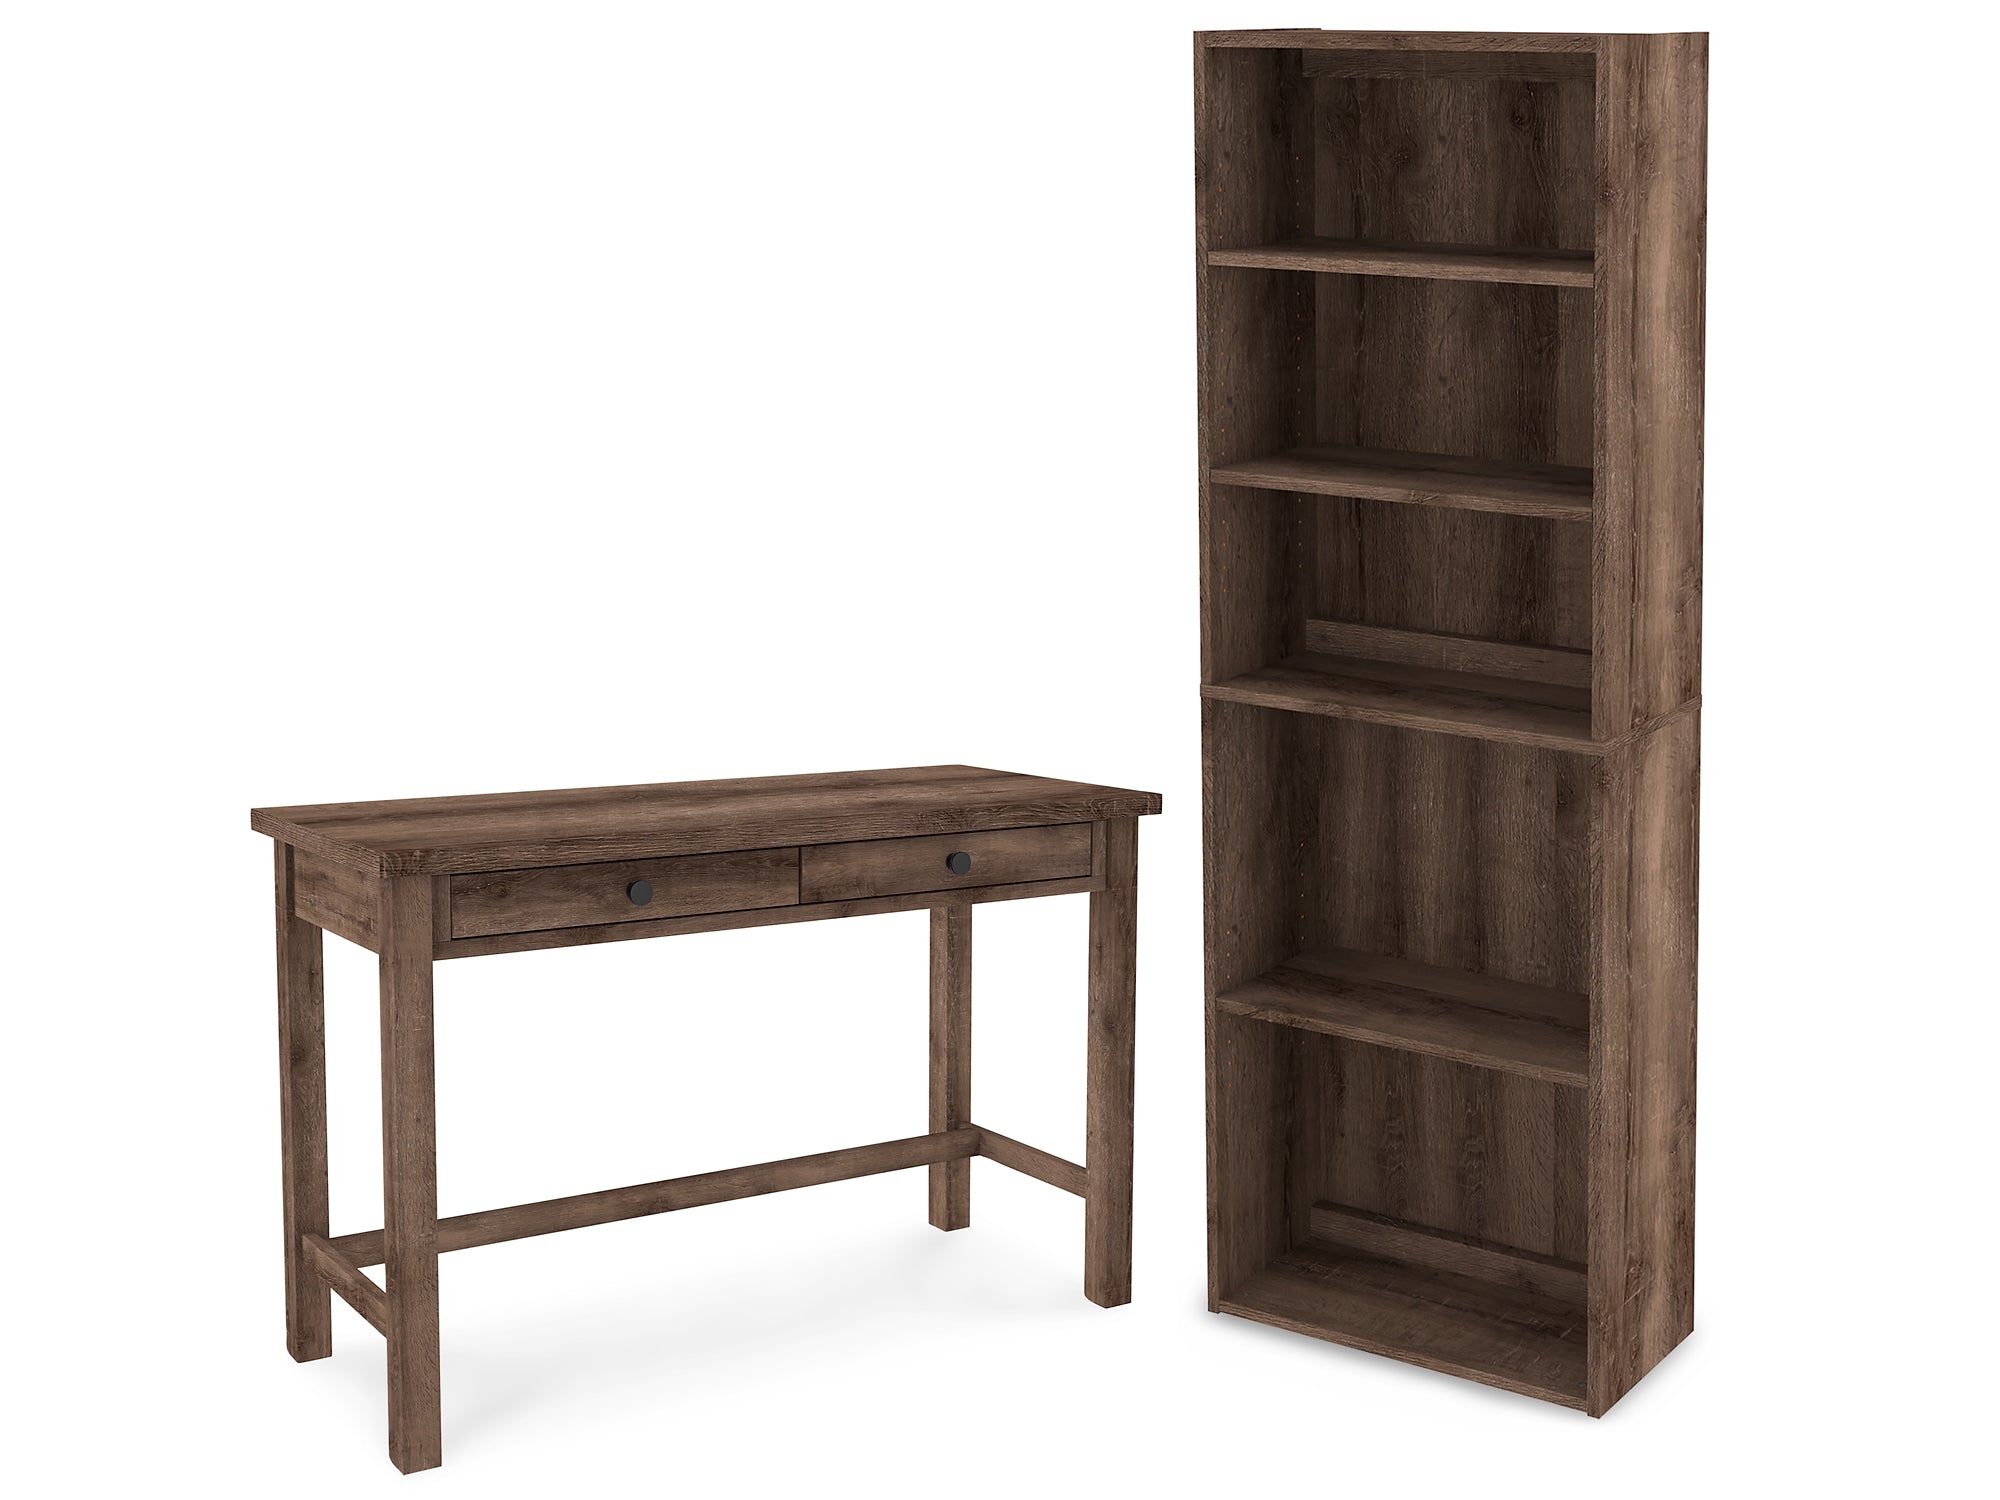 Arlenbry Home Office Desk and Storage